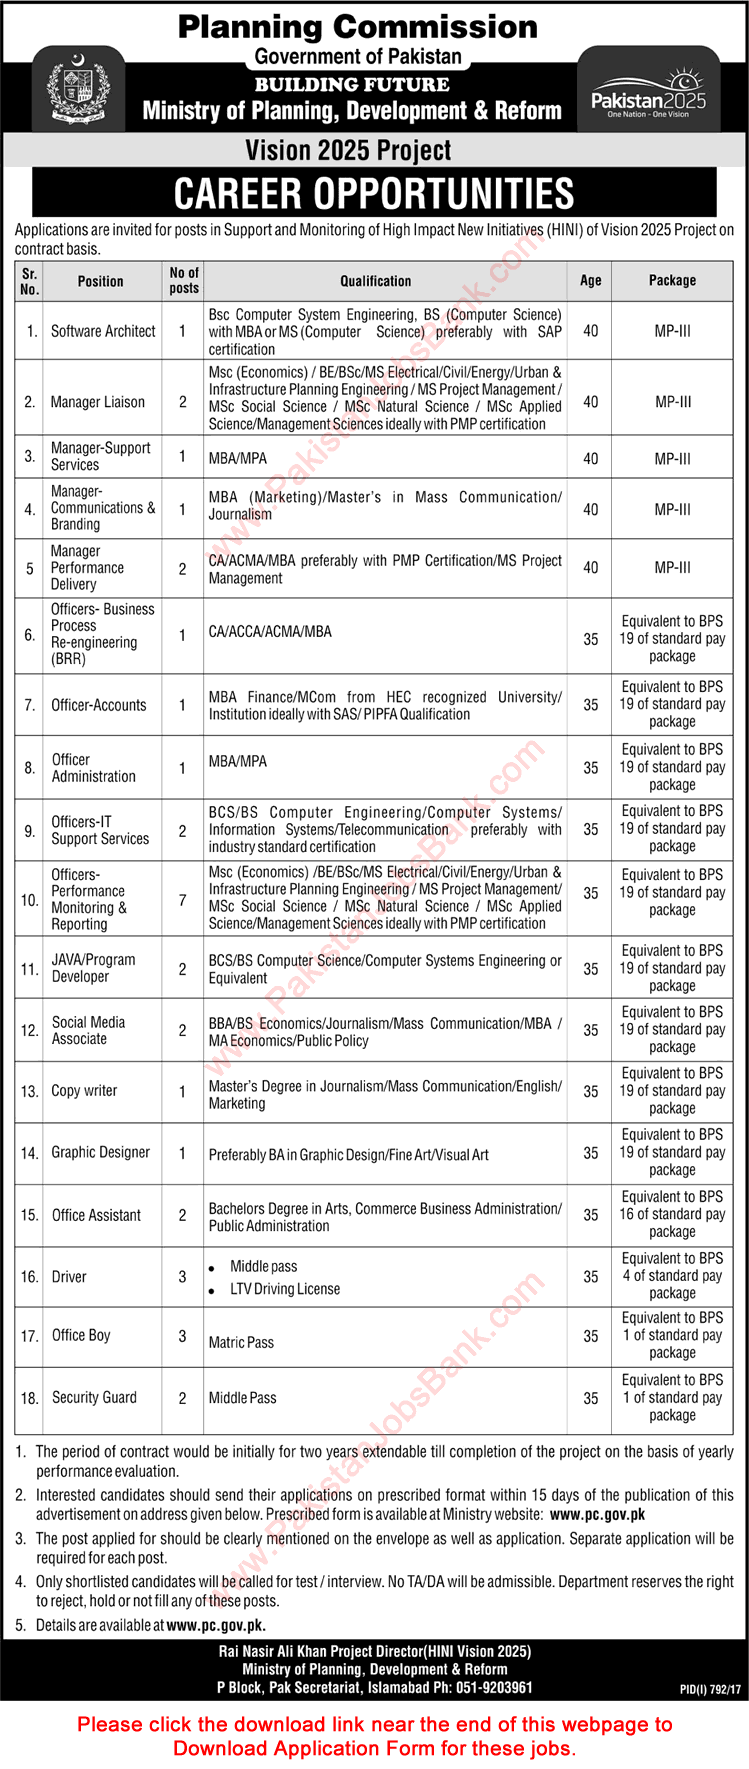 Ministry of Planning and Development Jobs August 2017 Islamabad Application Form Download Latest